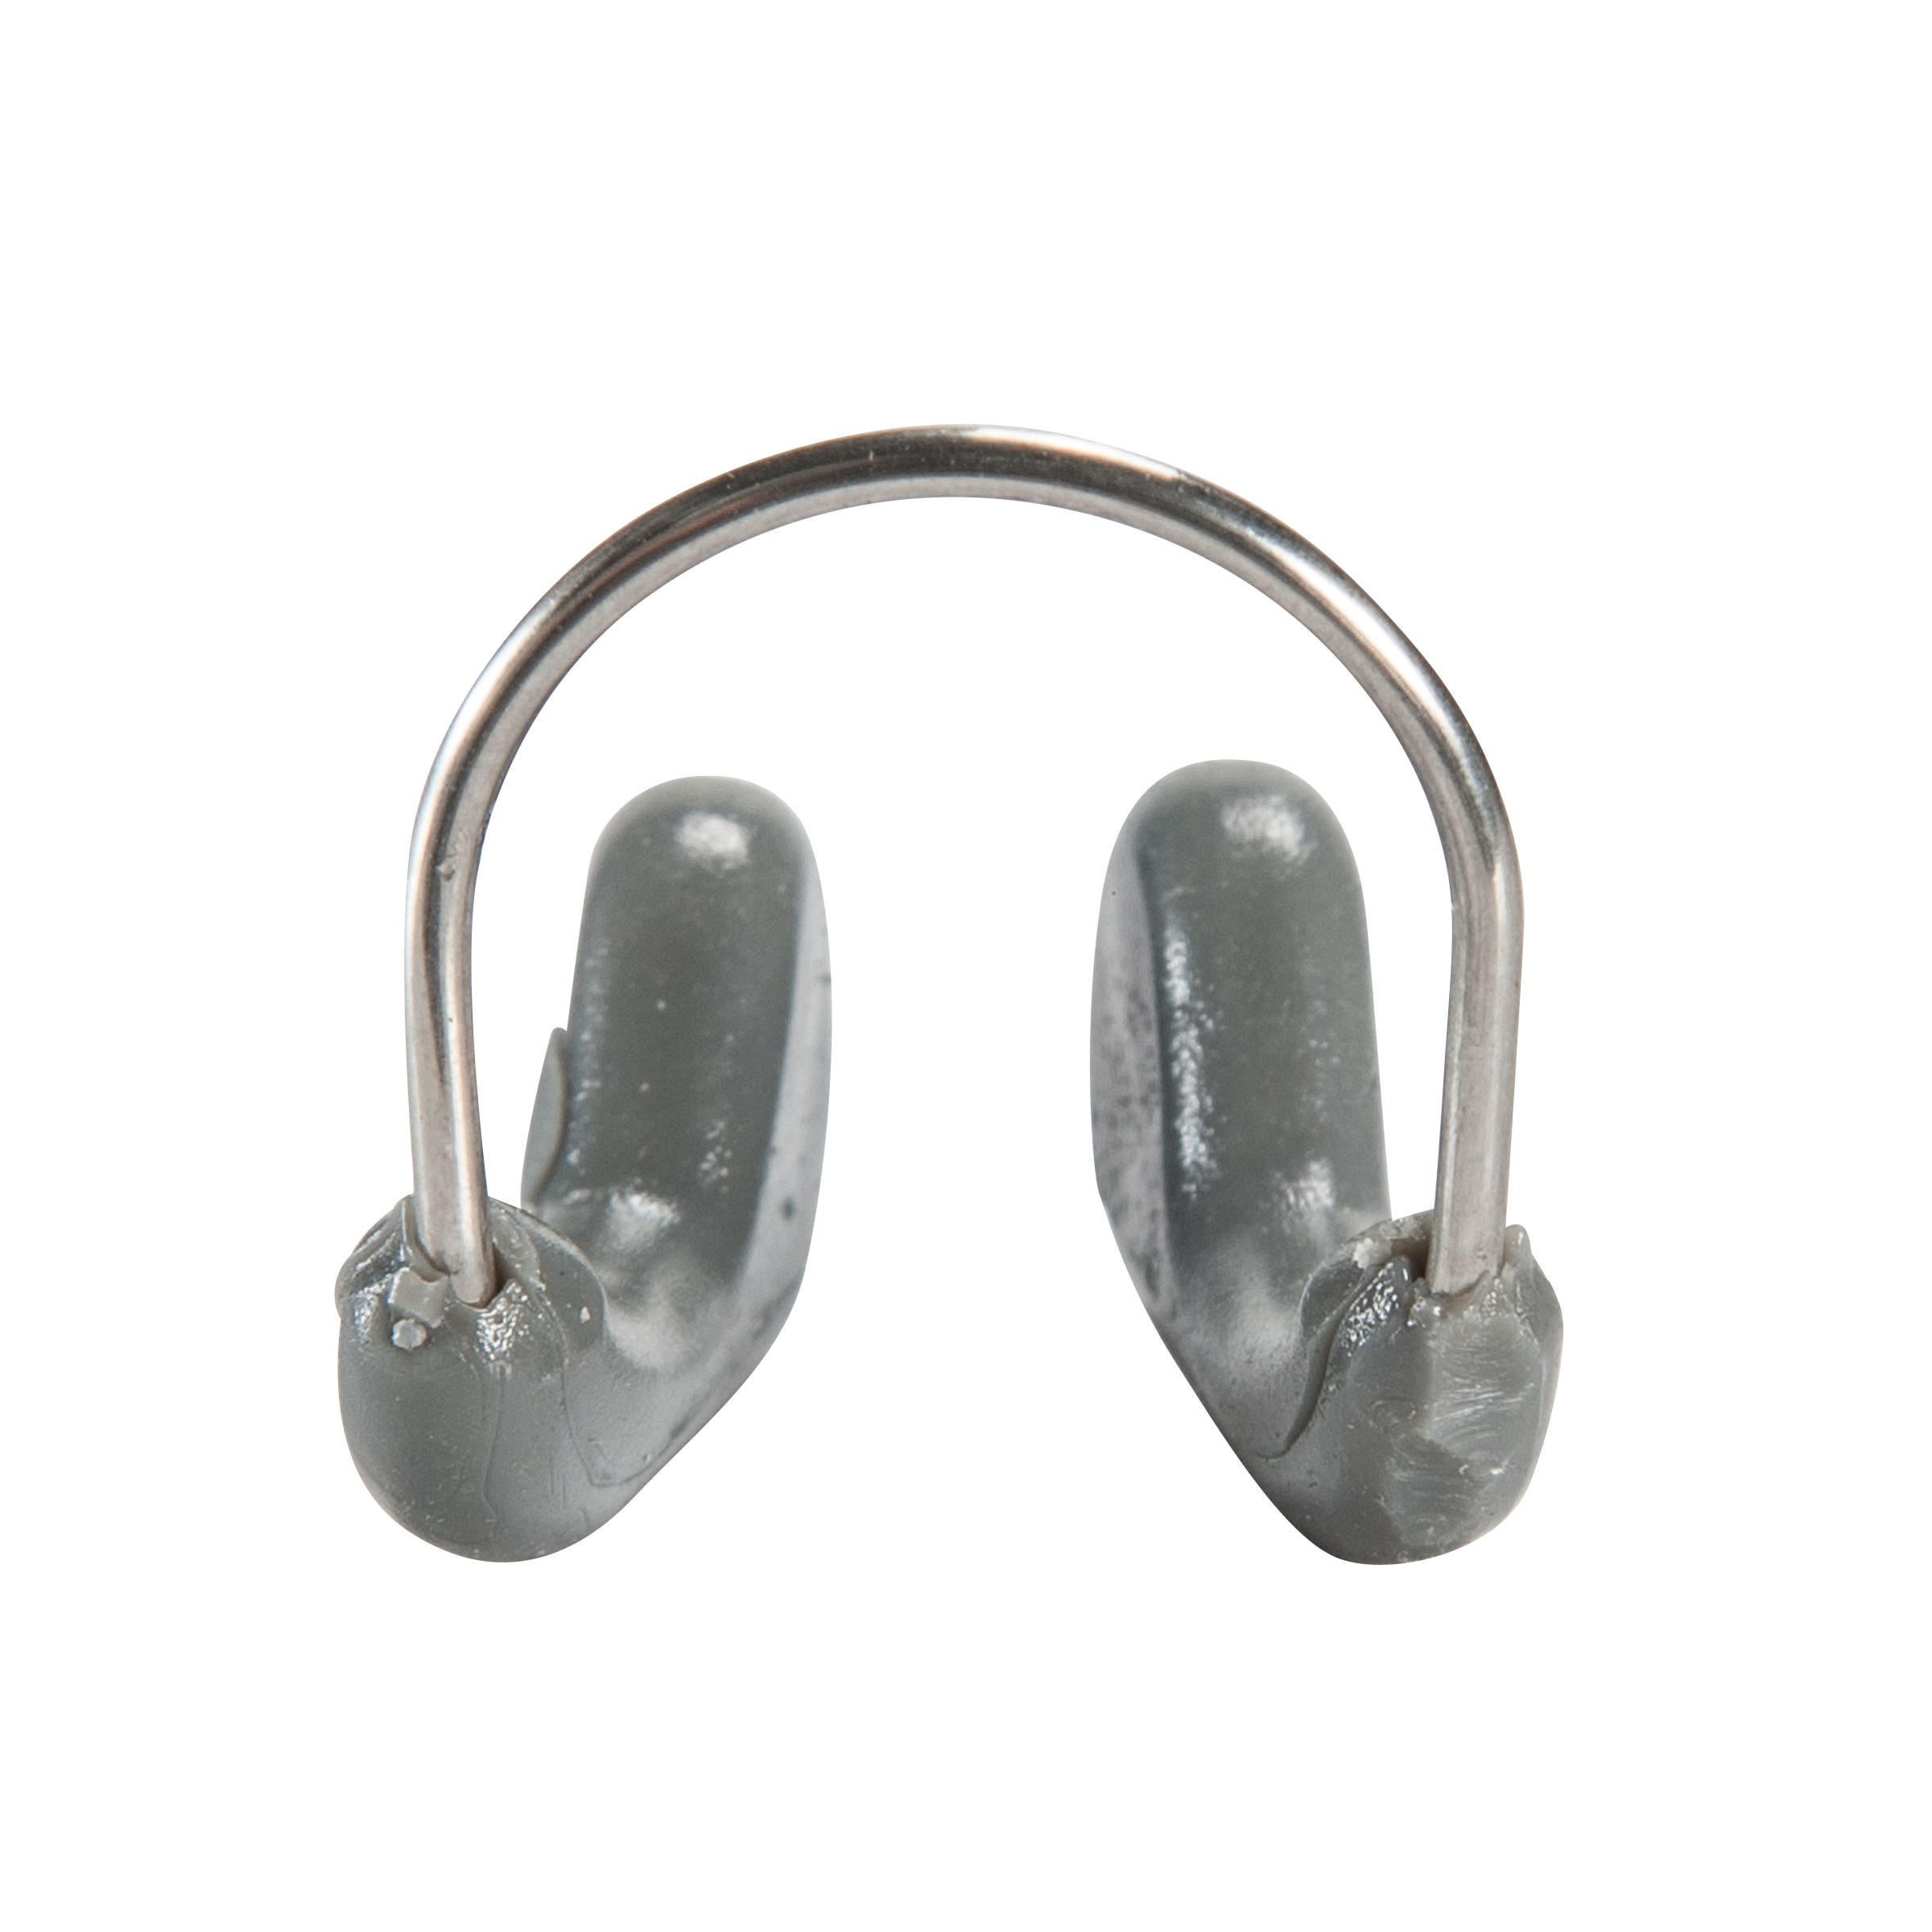 SPEEDO COMPETITION NOSE CLIP - GREY BLUE 6/10